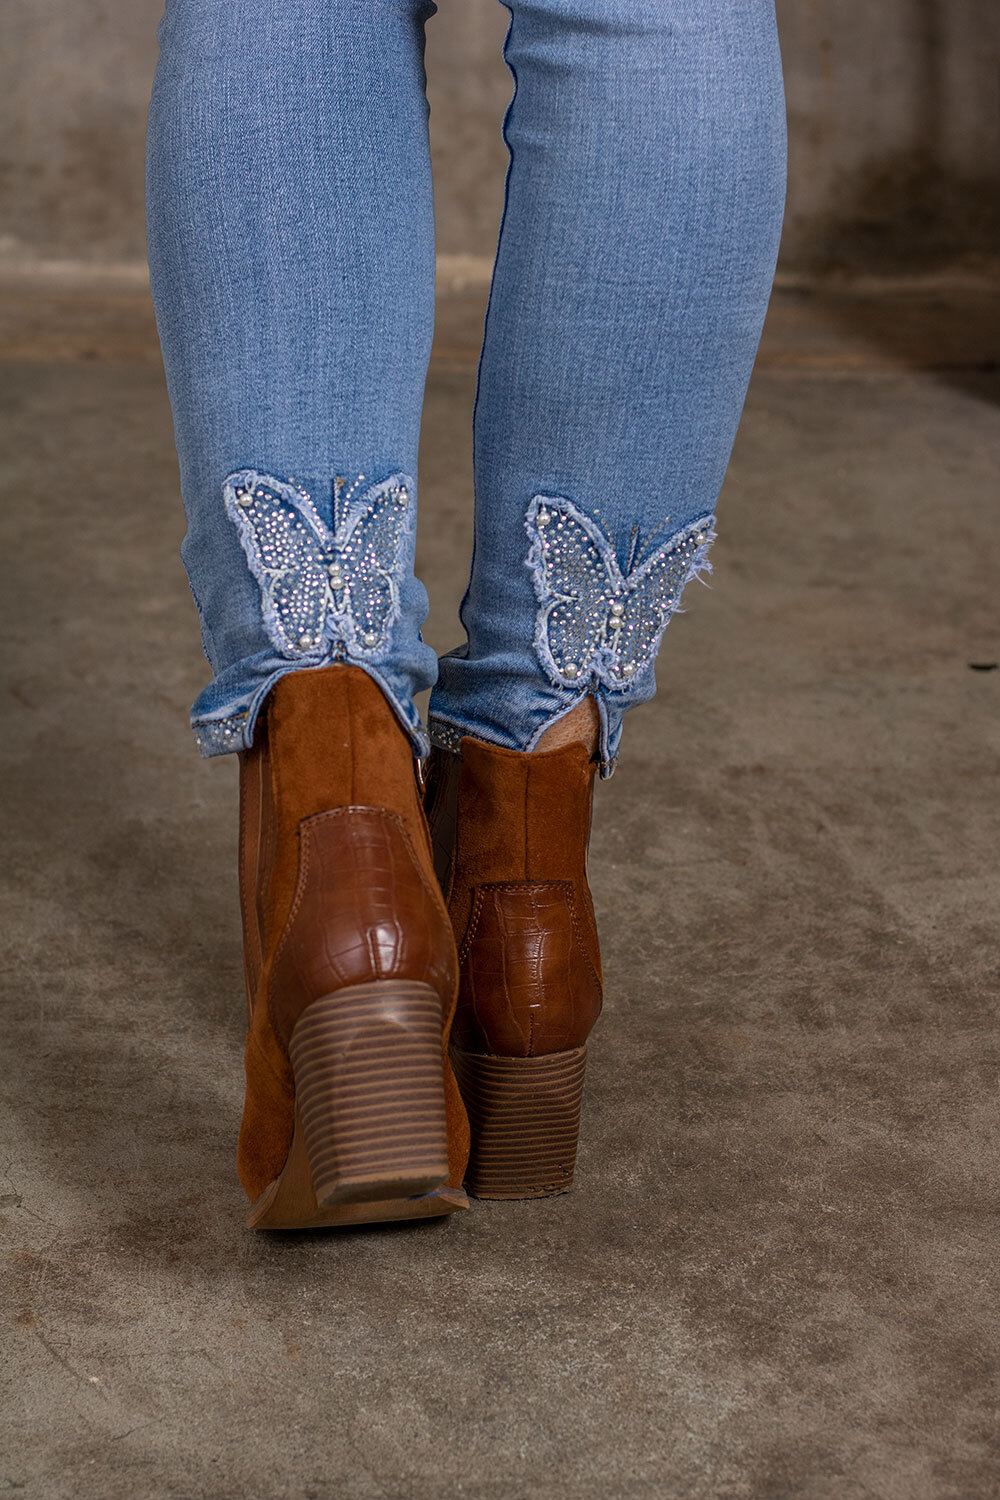 Skinny Jeans RD7182 - Bling butterfly - Light wash